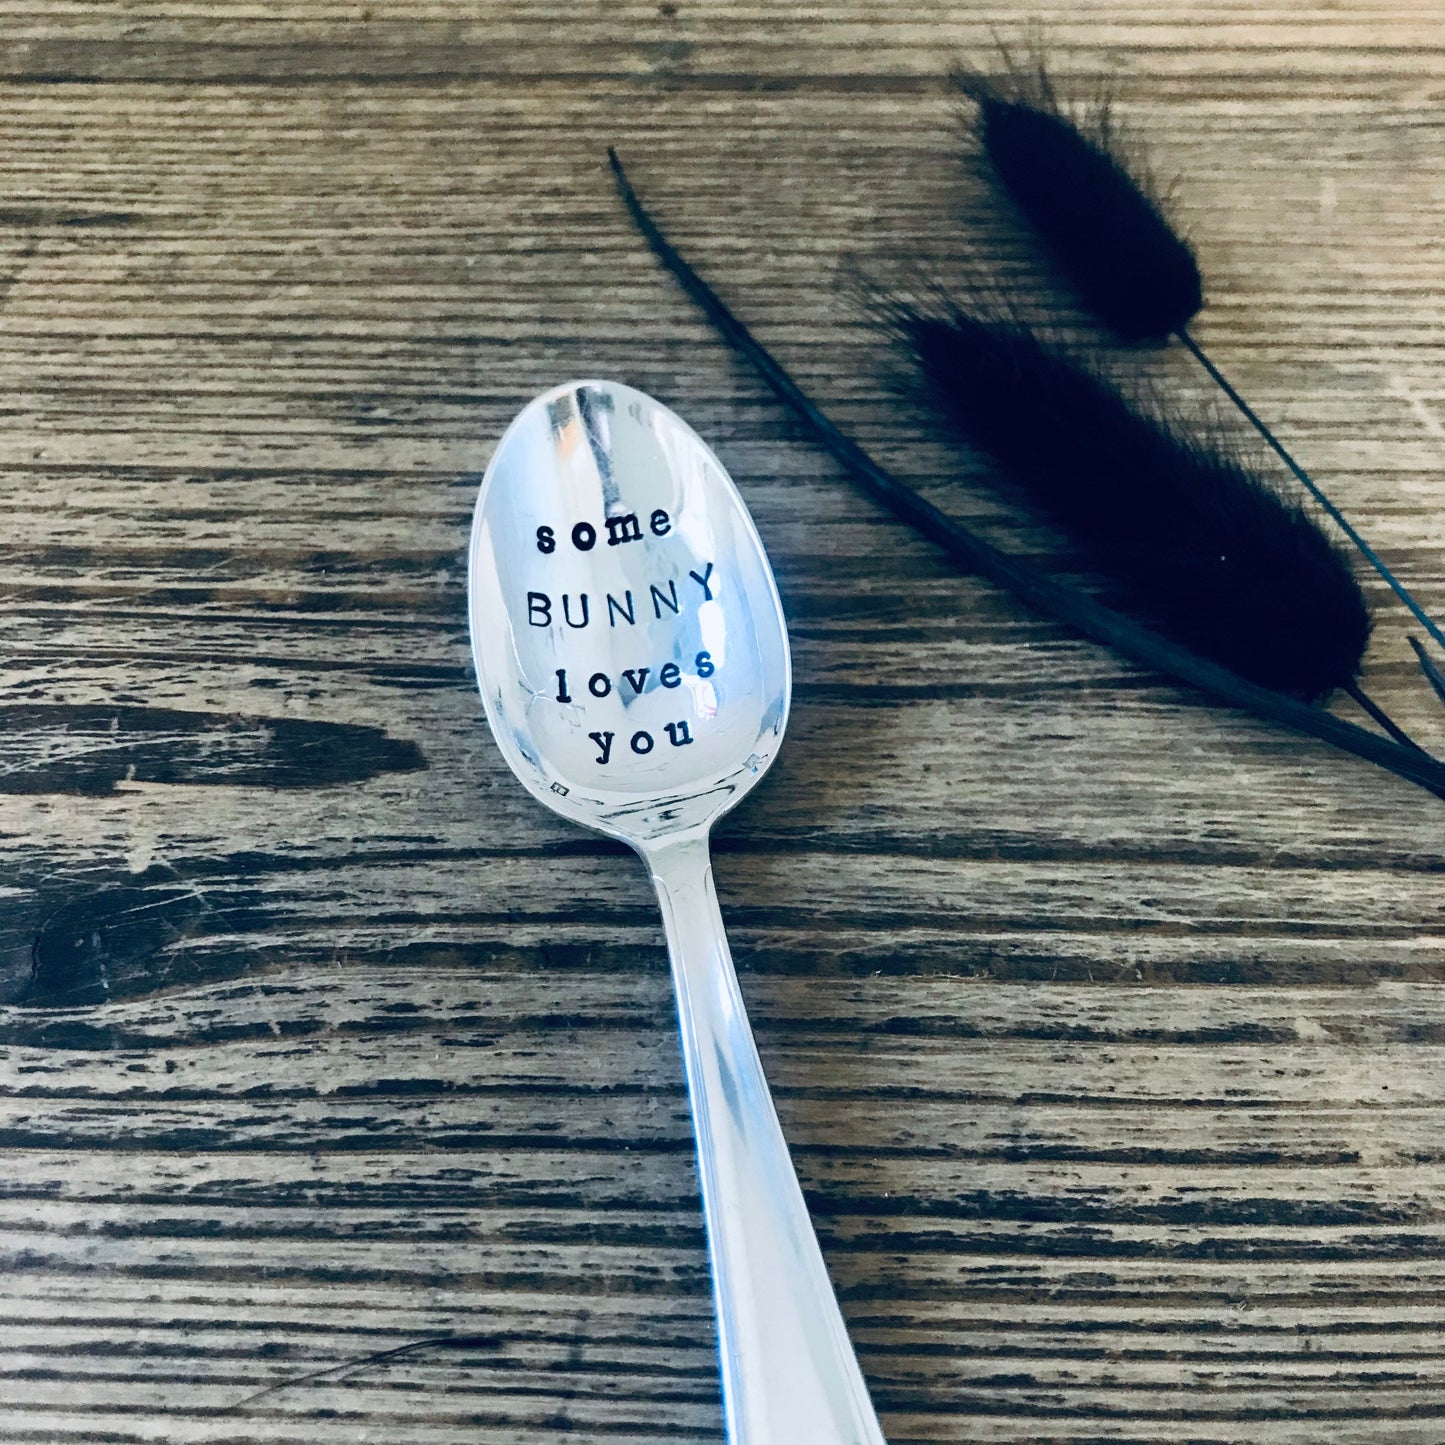 Some bunny loves you - Stamped tea spoon - Easter gift - Tea lover - SOZO Silver